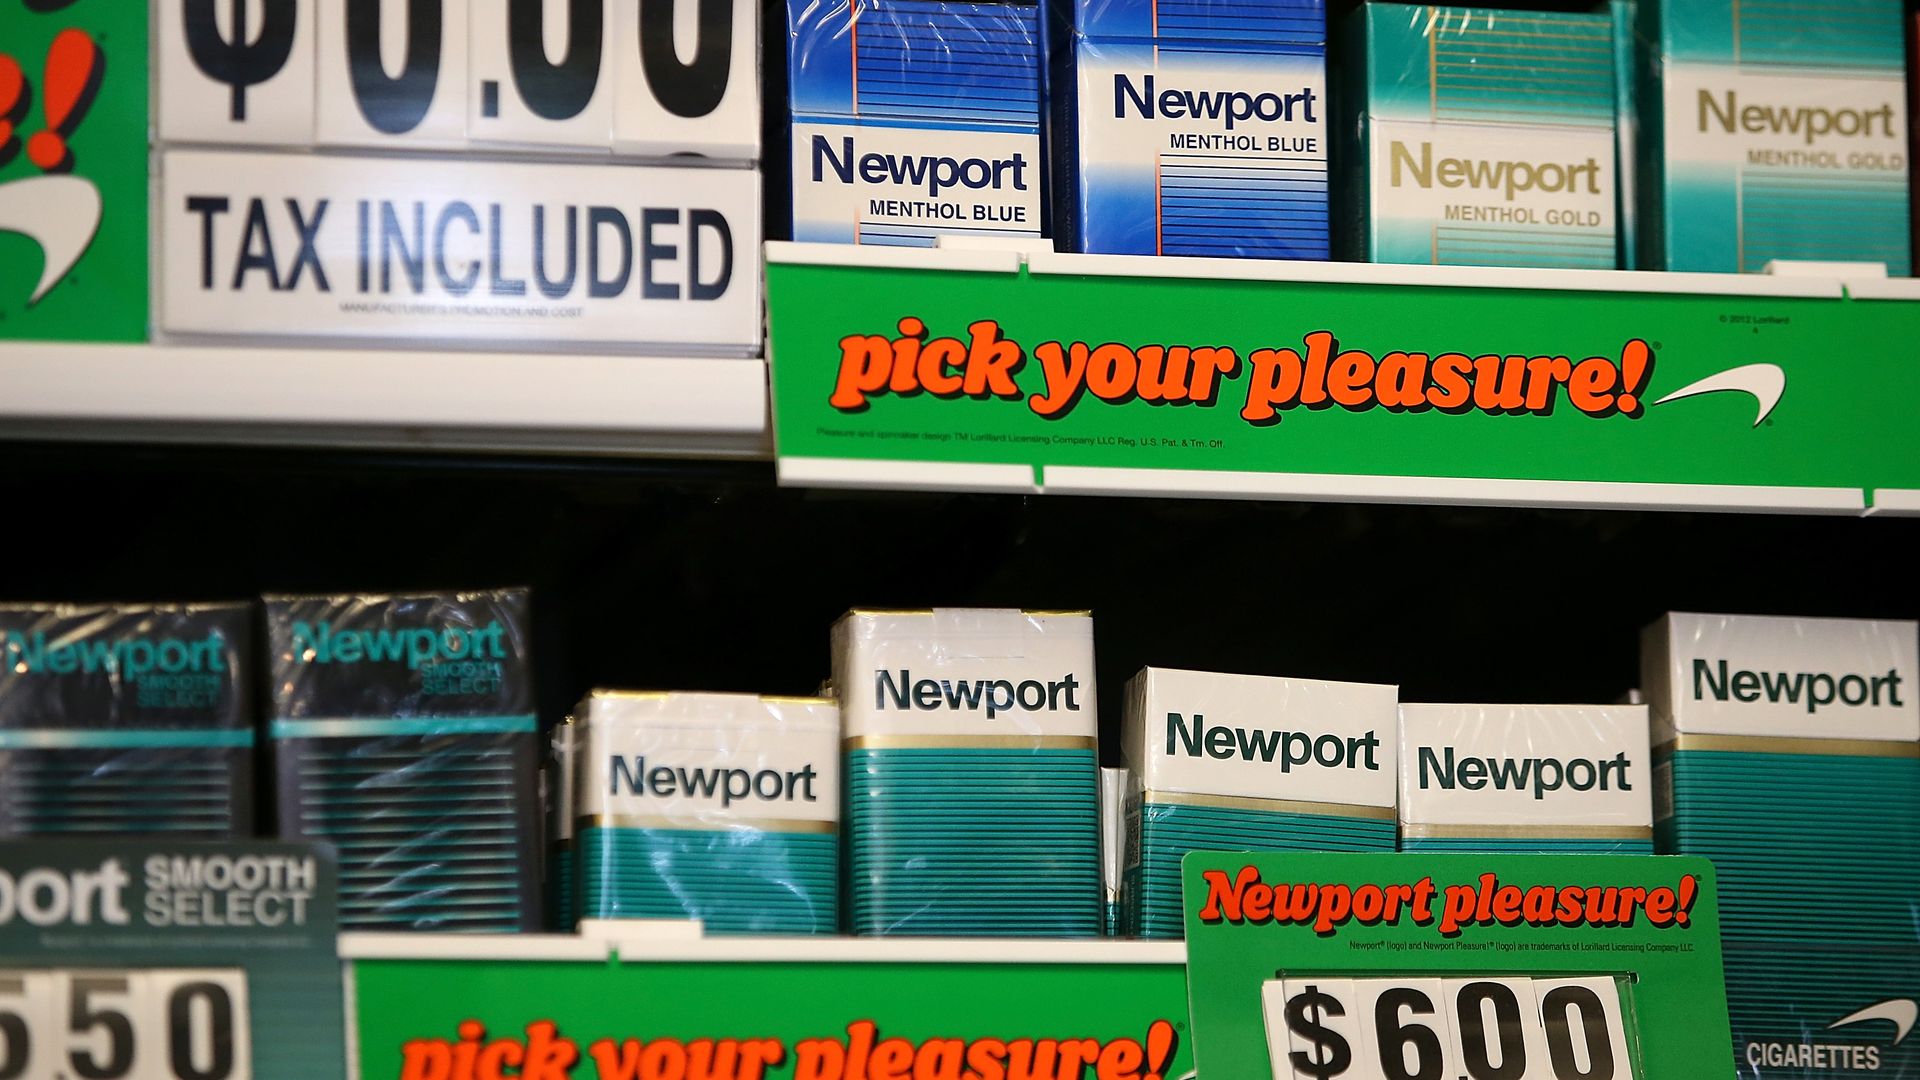 NEwport cigarettes behind the counter.